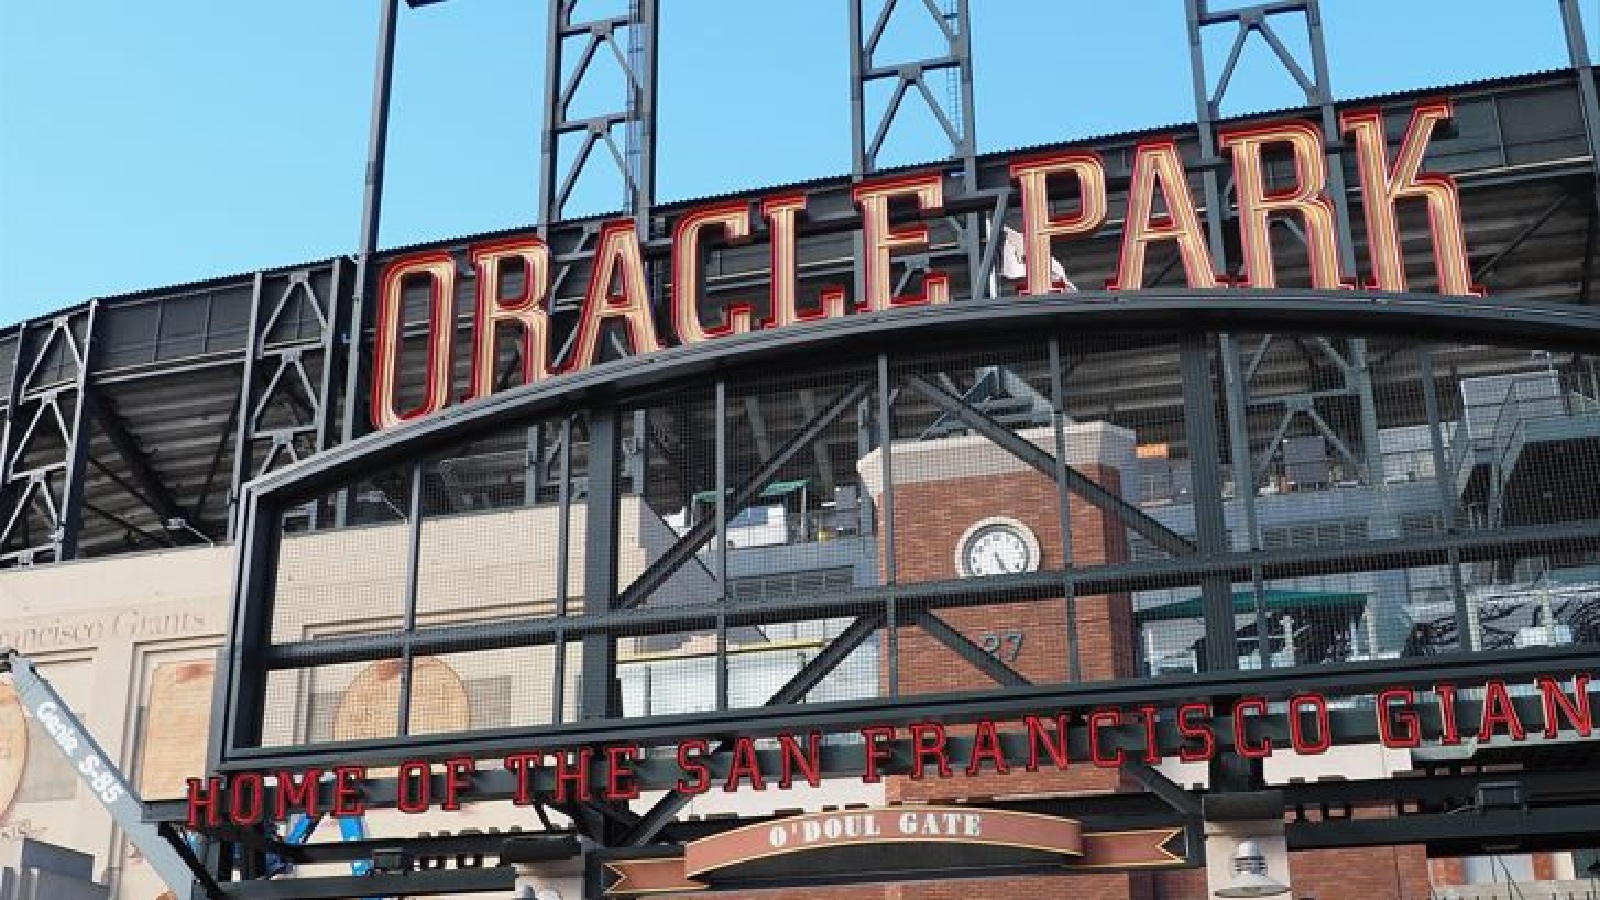 Giants address embarrassing merchandise gaffe at Oracle Park